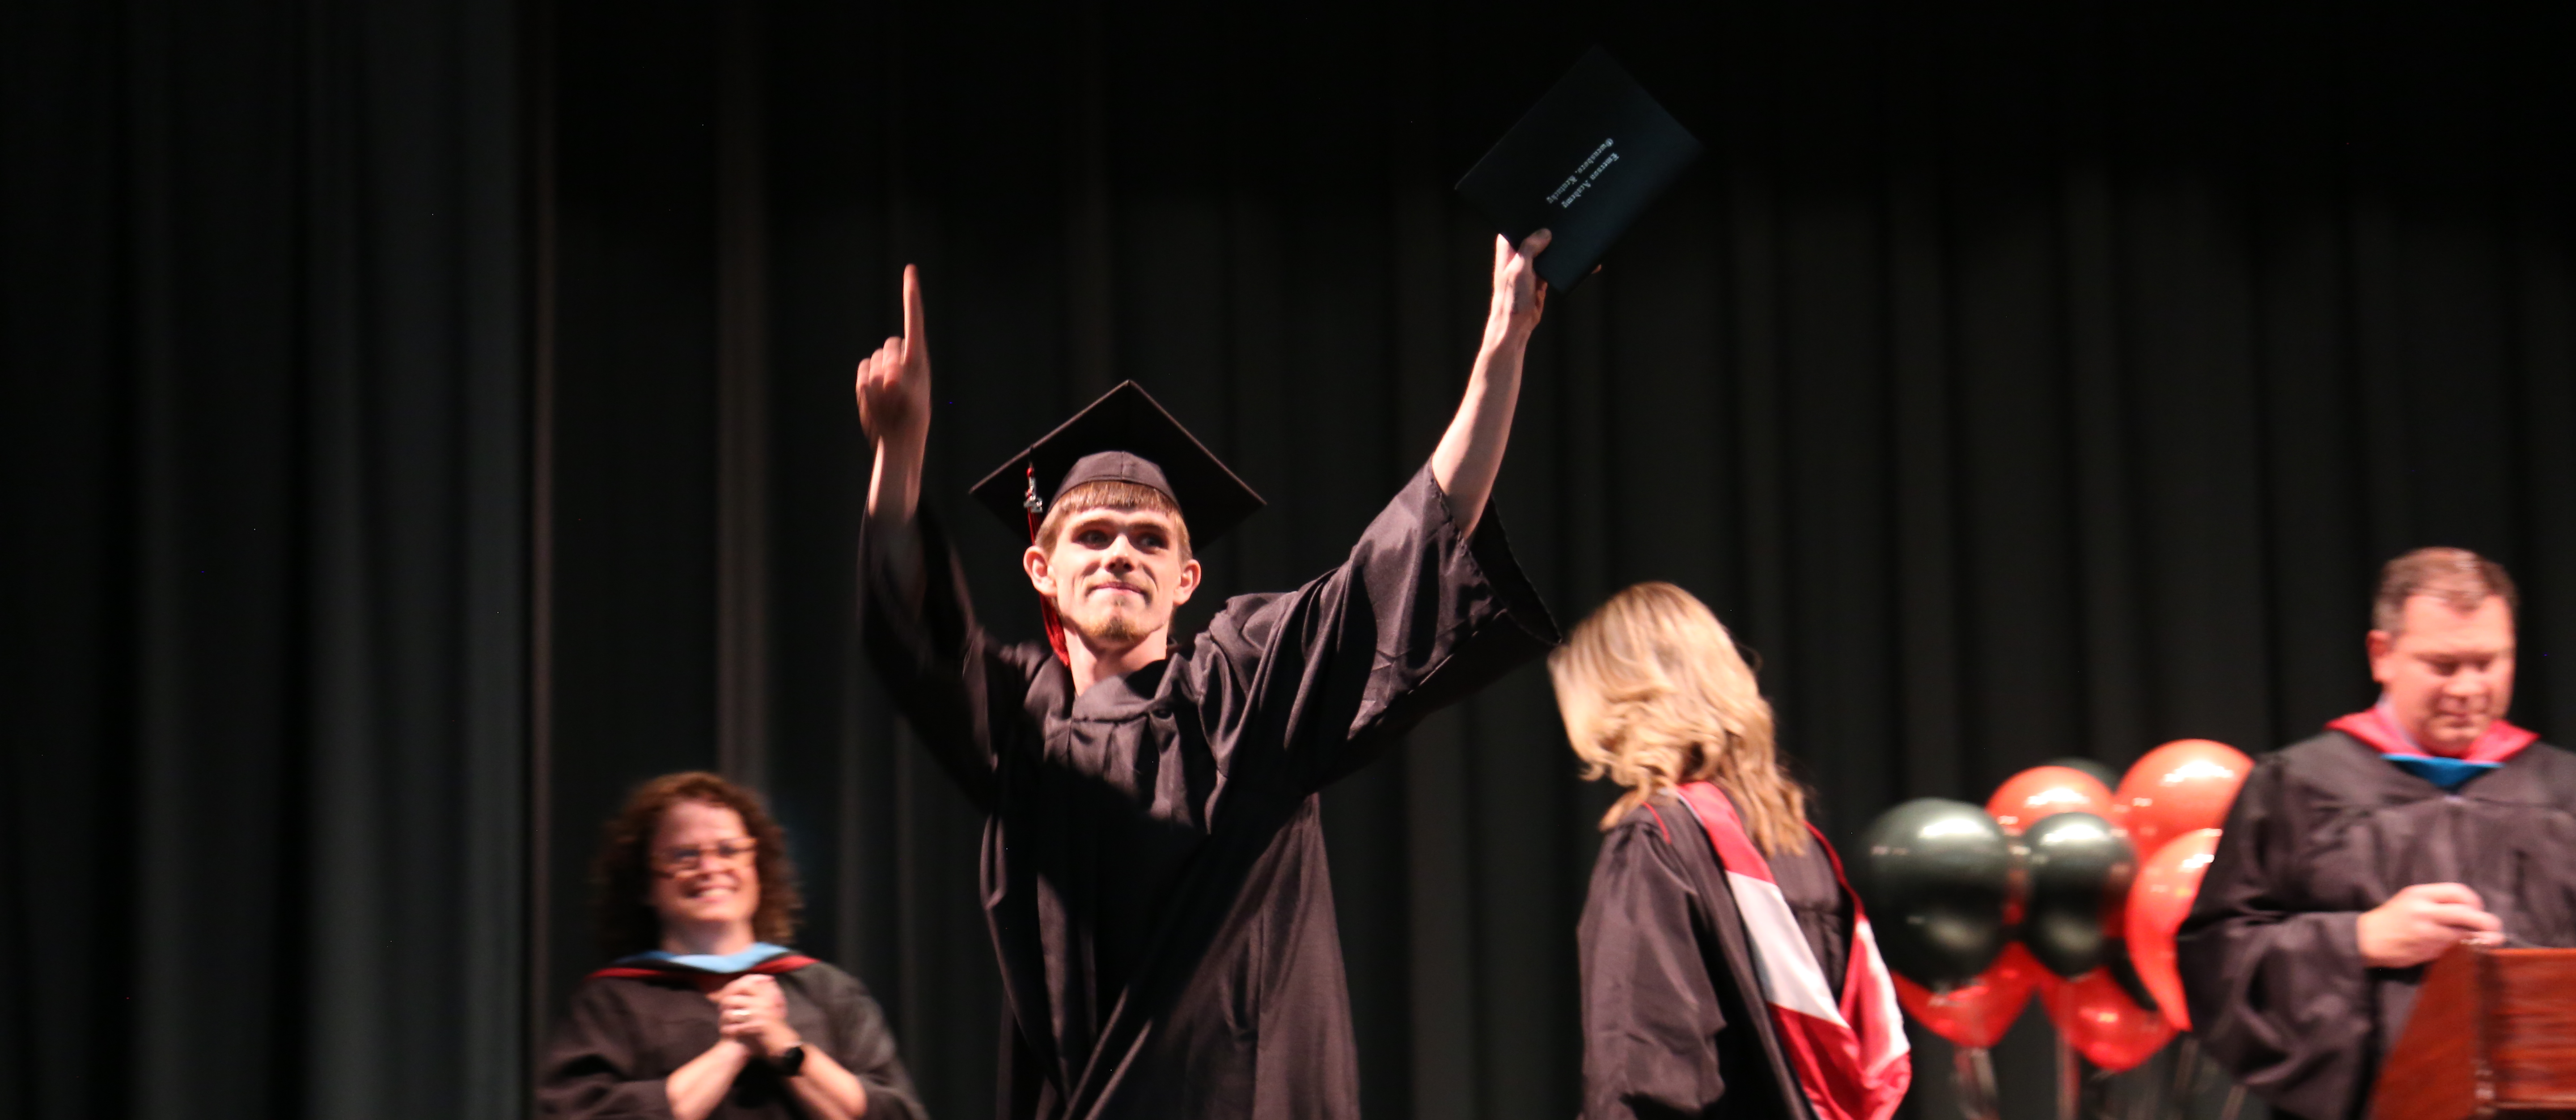 a student celebrating in cap and gown with his dipolma